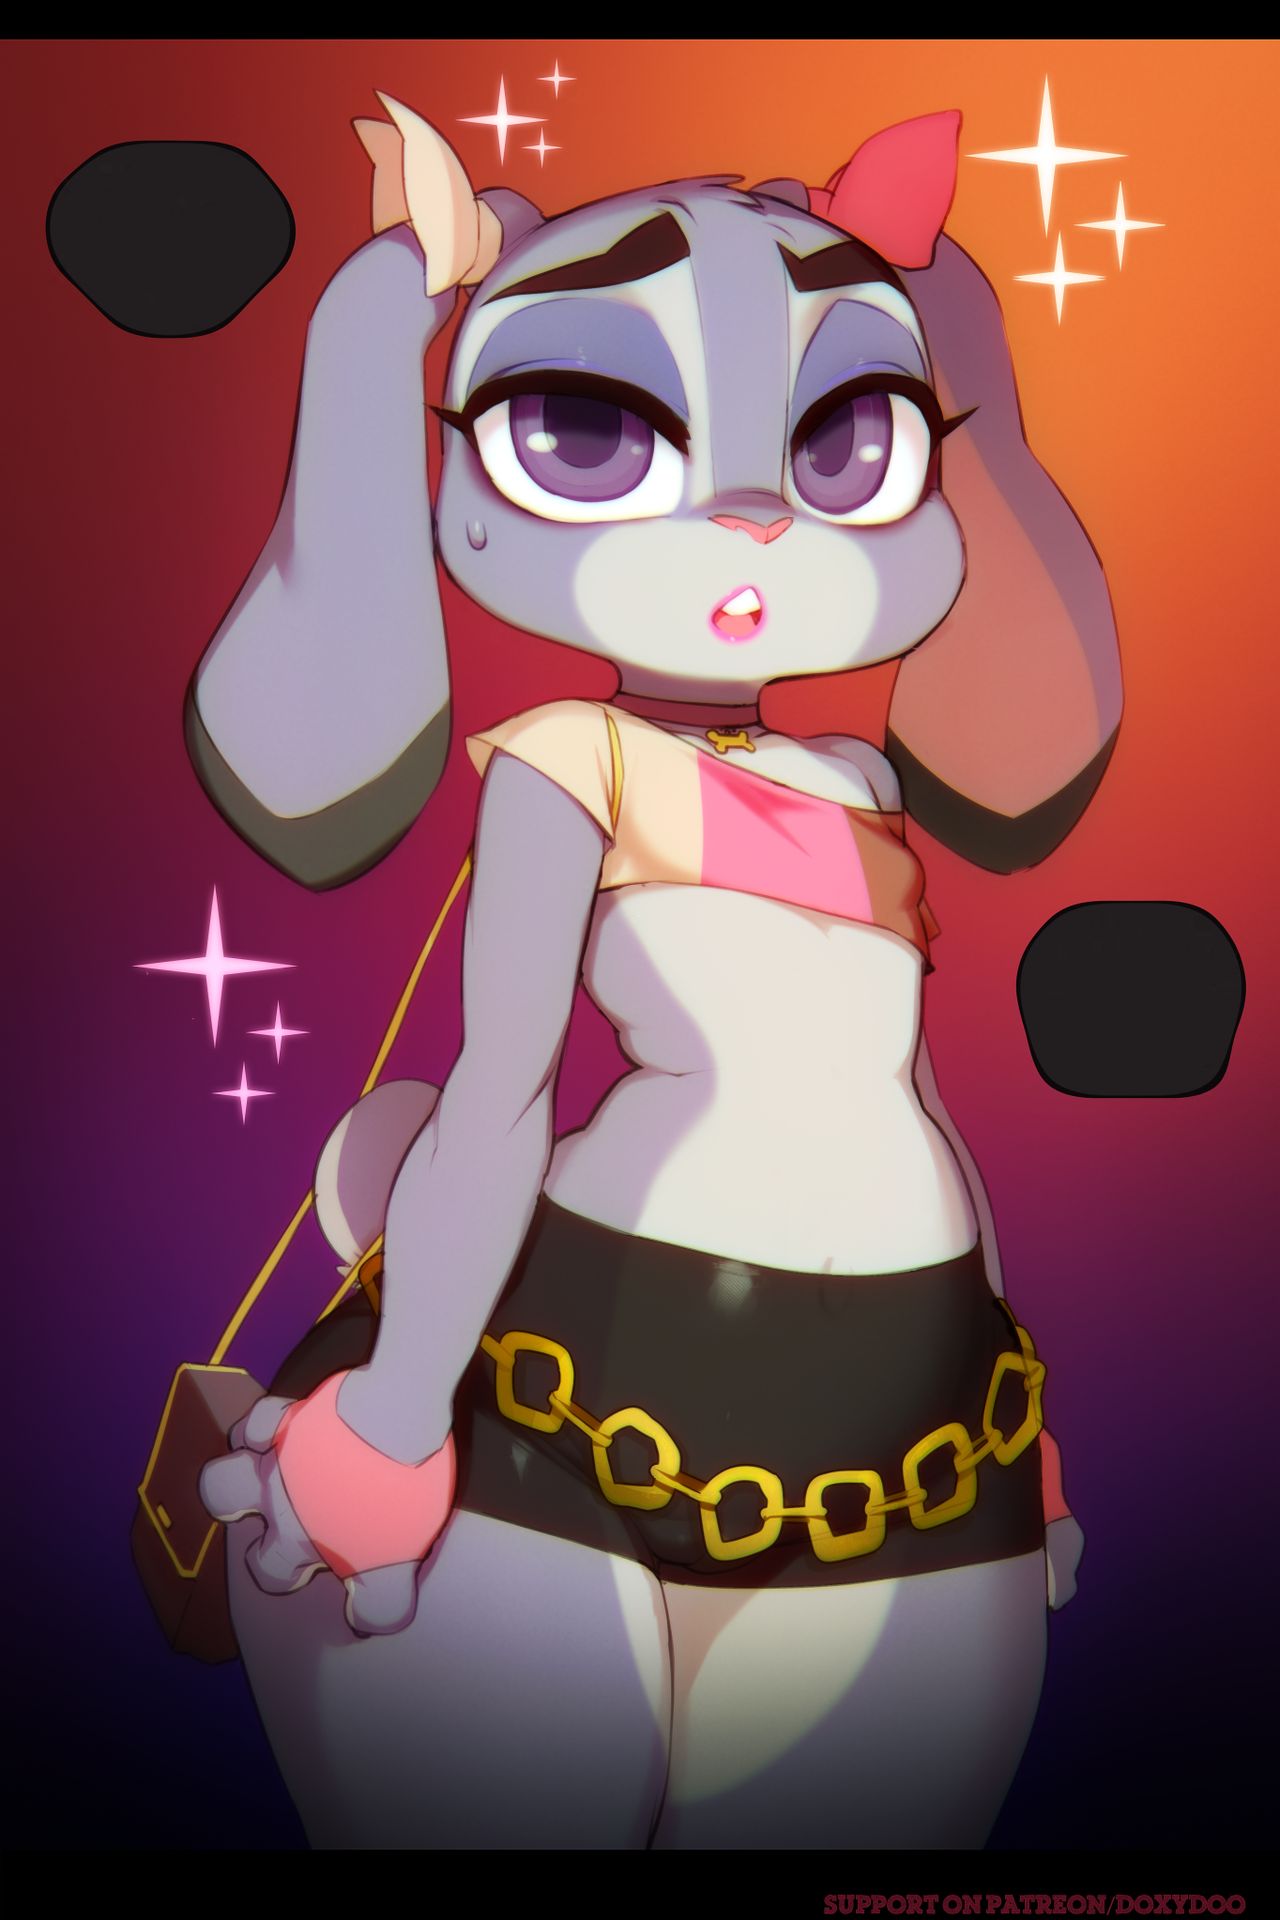 [Doxy] Sweet Sting Part 2: Down The Rabbit Hole (Zootopia) [Textless] [Ongoing] 